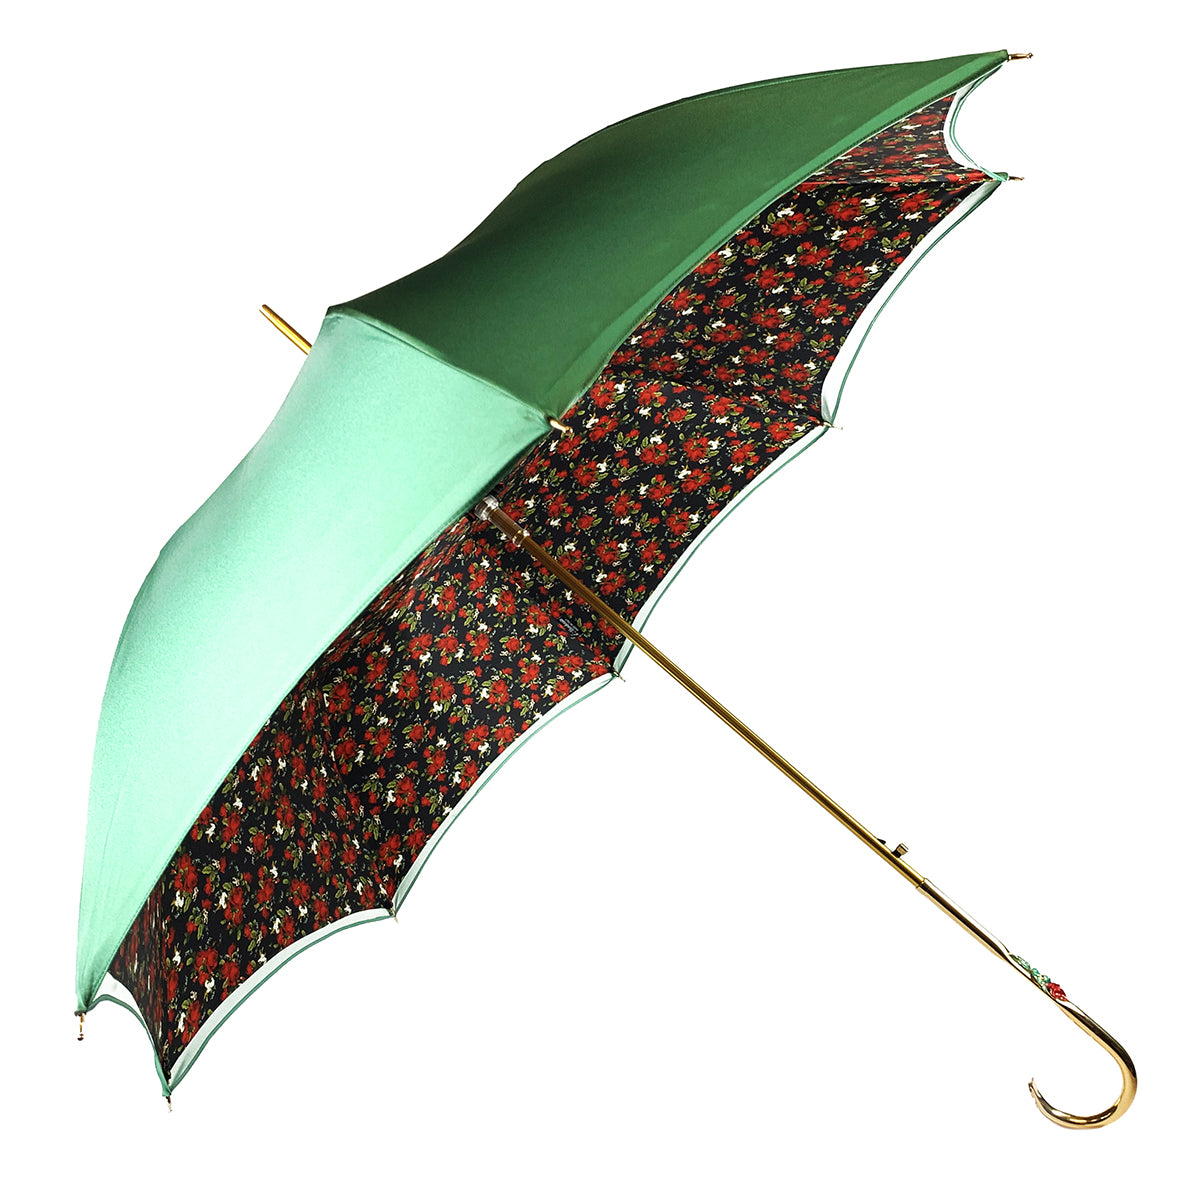 Fanciful Green Umbrella with Roses